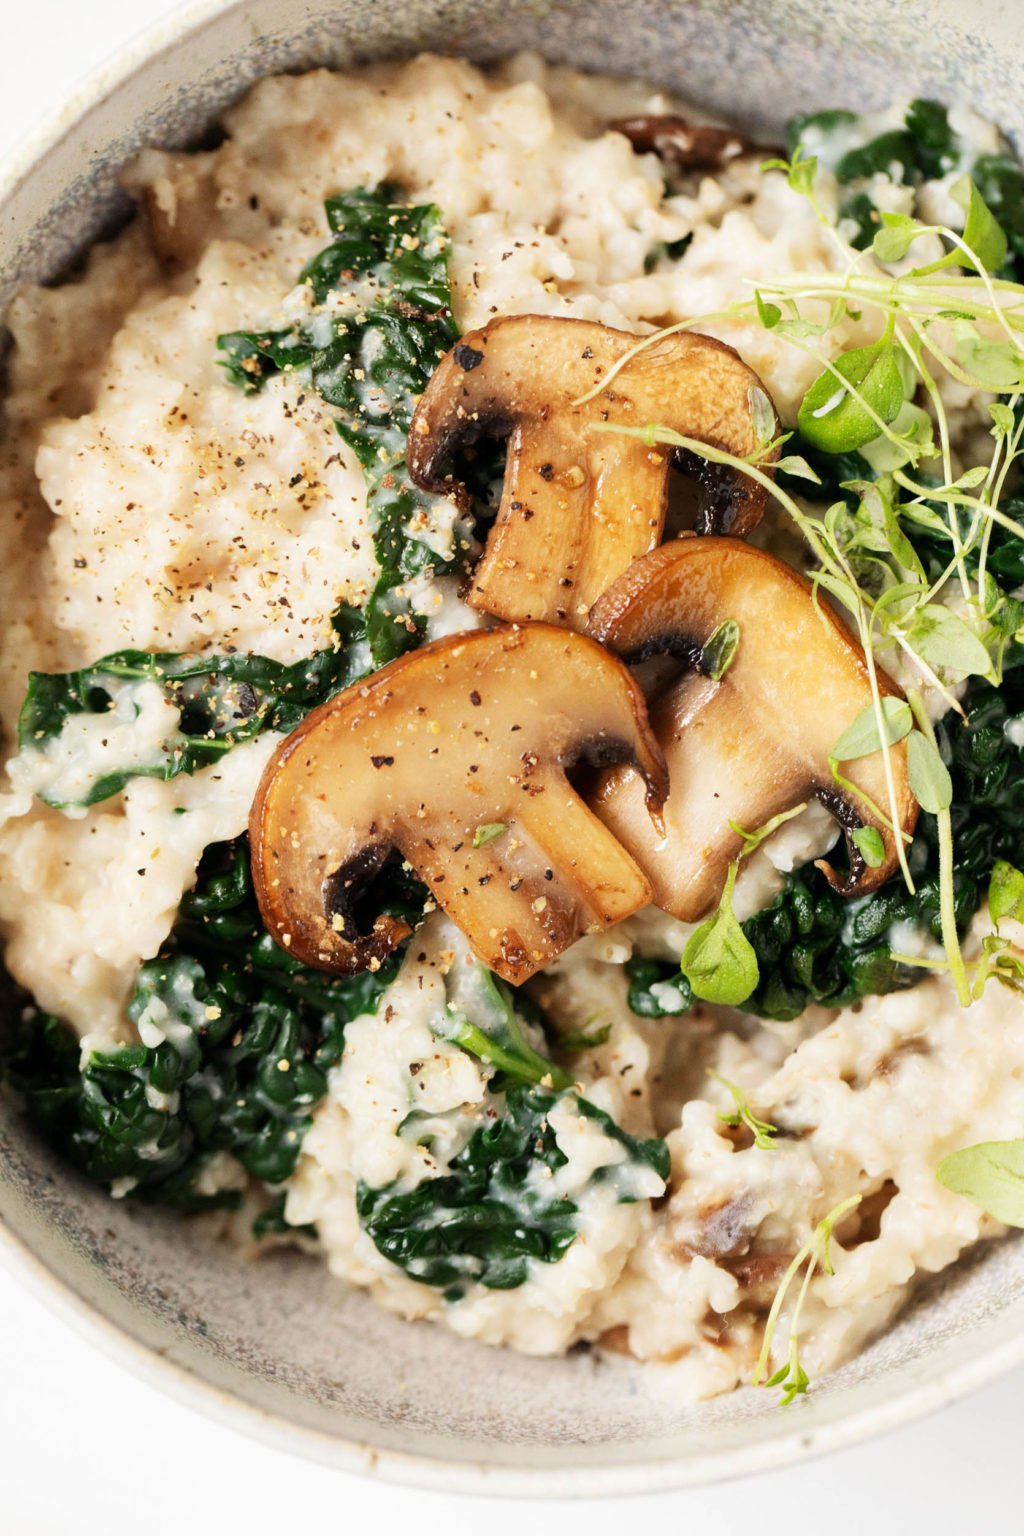 A close up photograph of a savory, whole grain breakfast with mushrooms and greens.